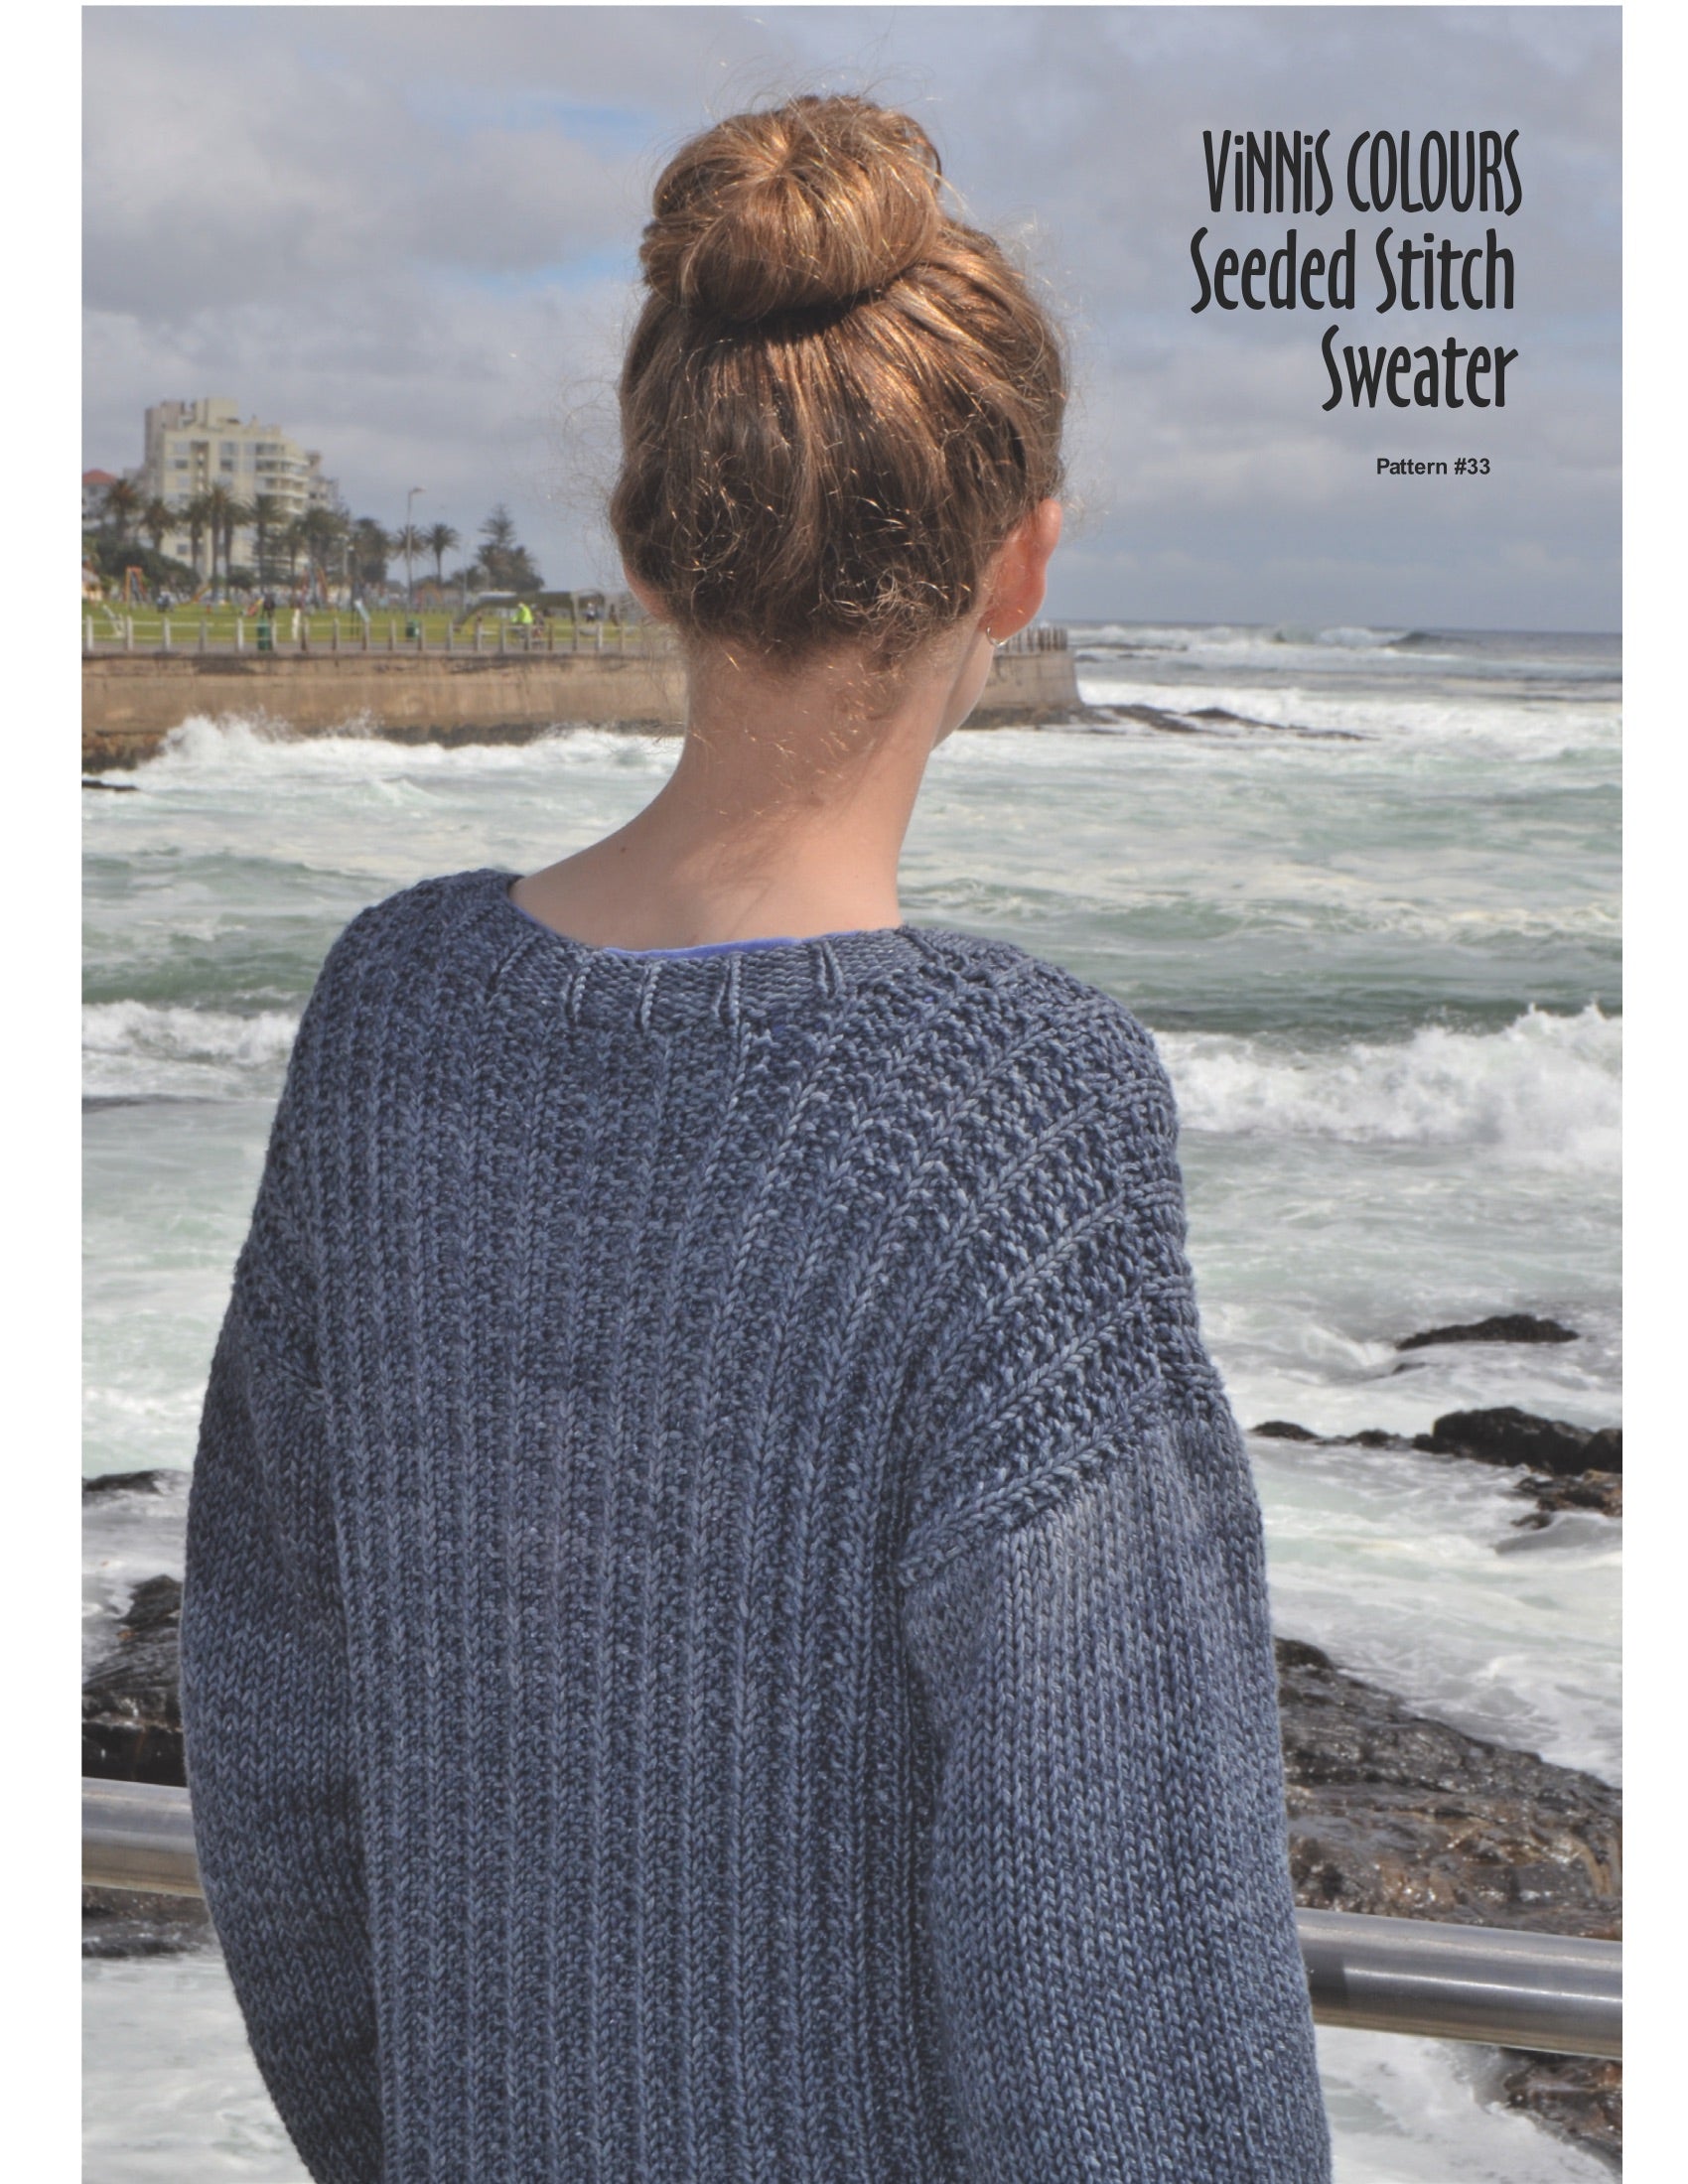 VCDL - P033 - Seeded Stitch Sweater